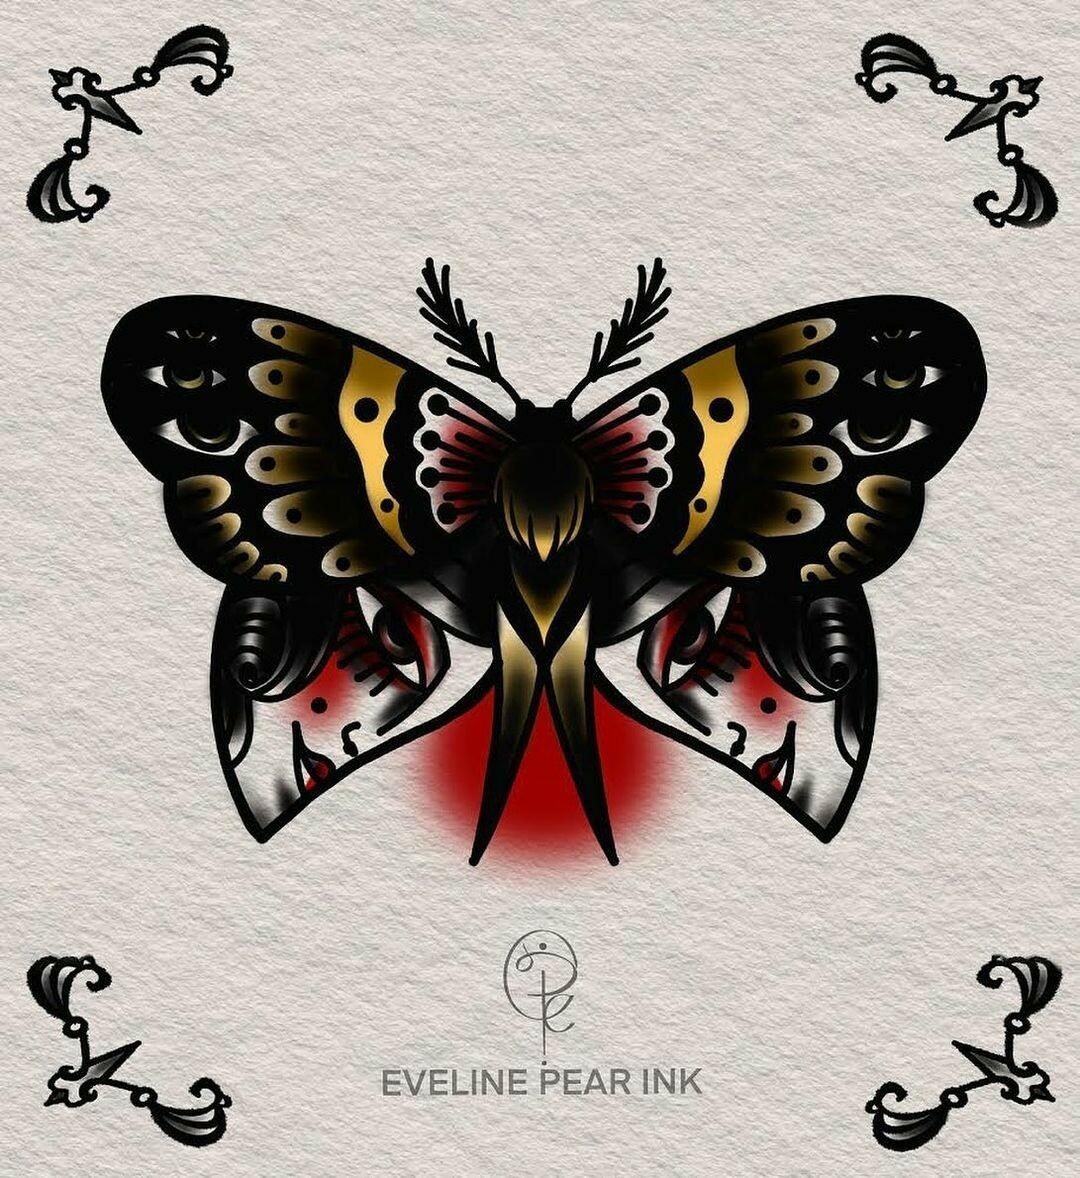 Inksearch tattoo Eveline Pear Ink